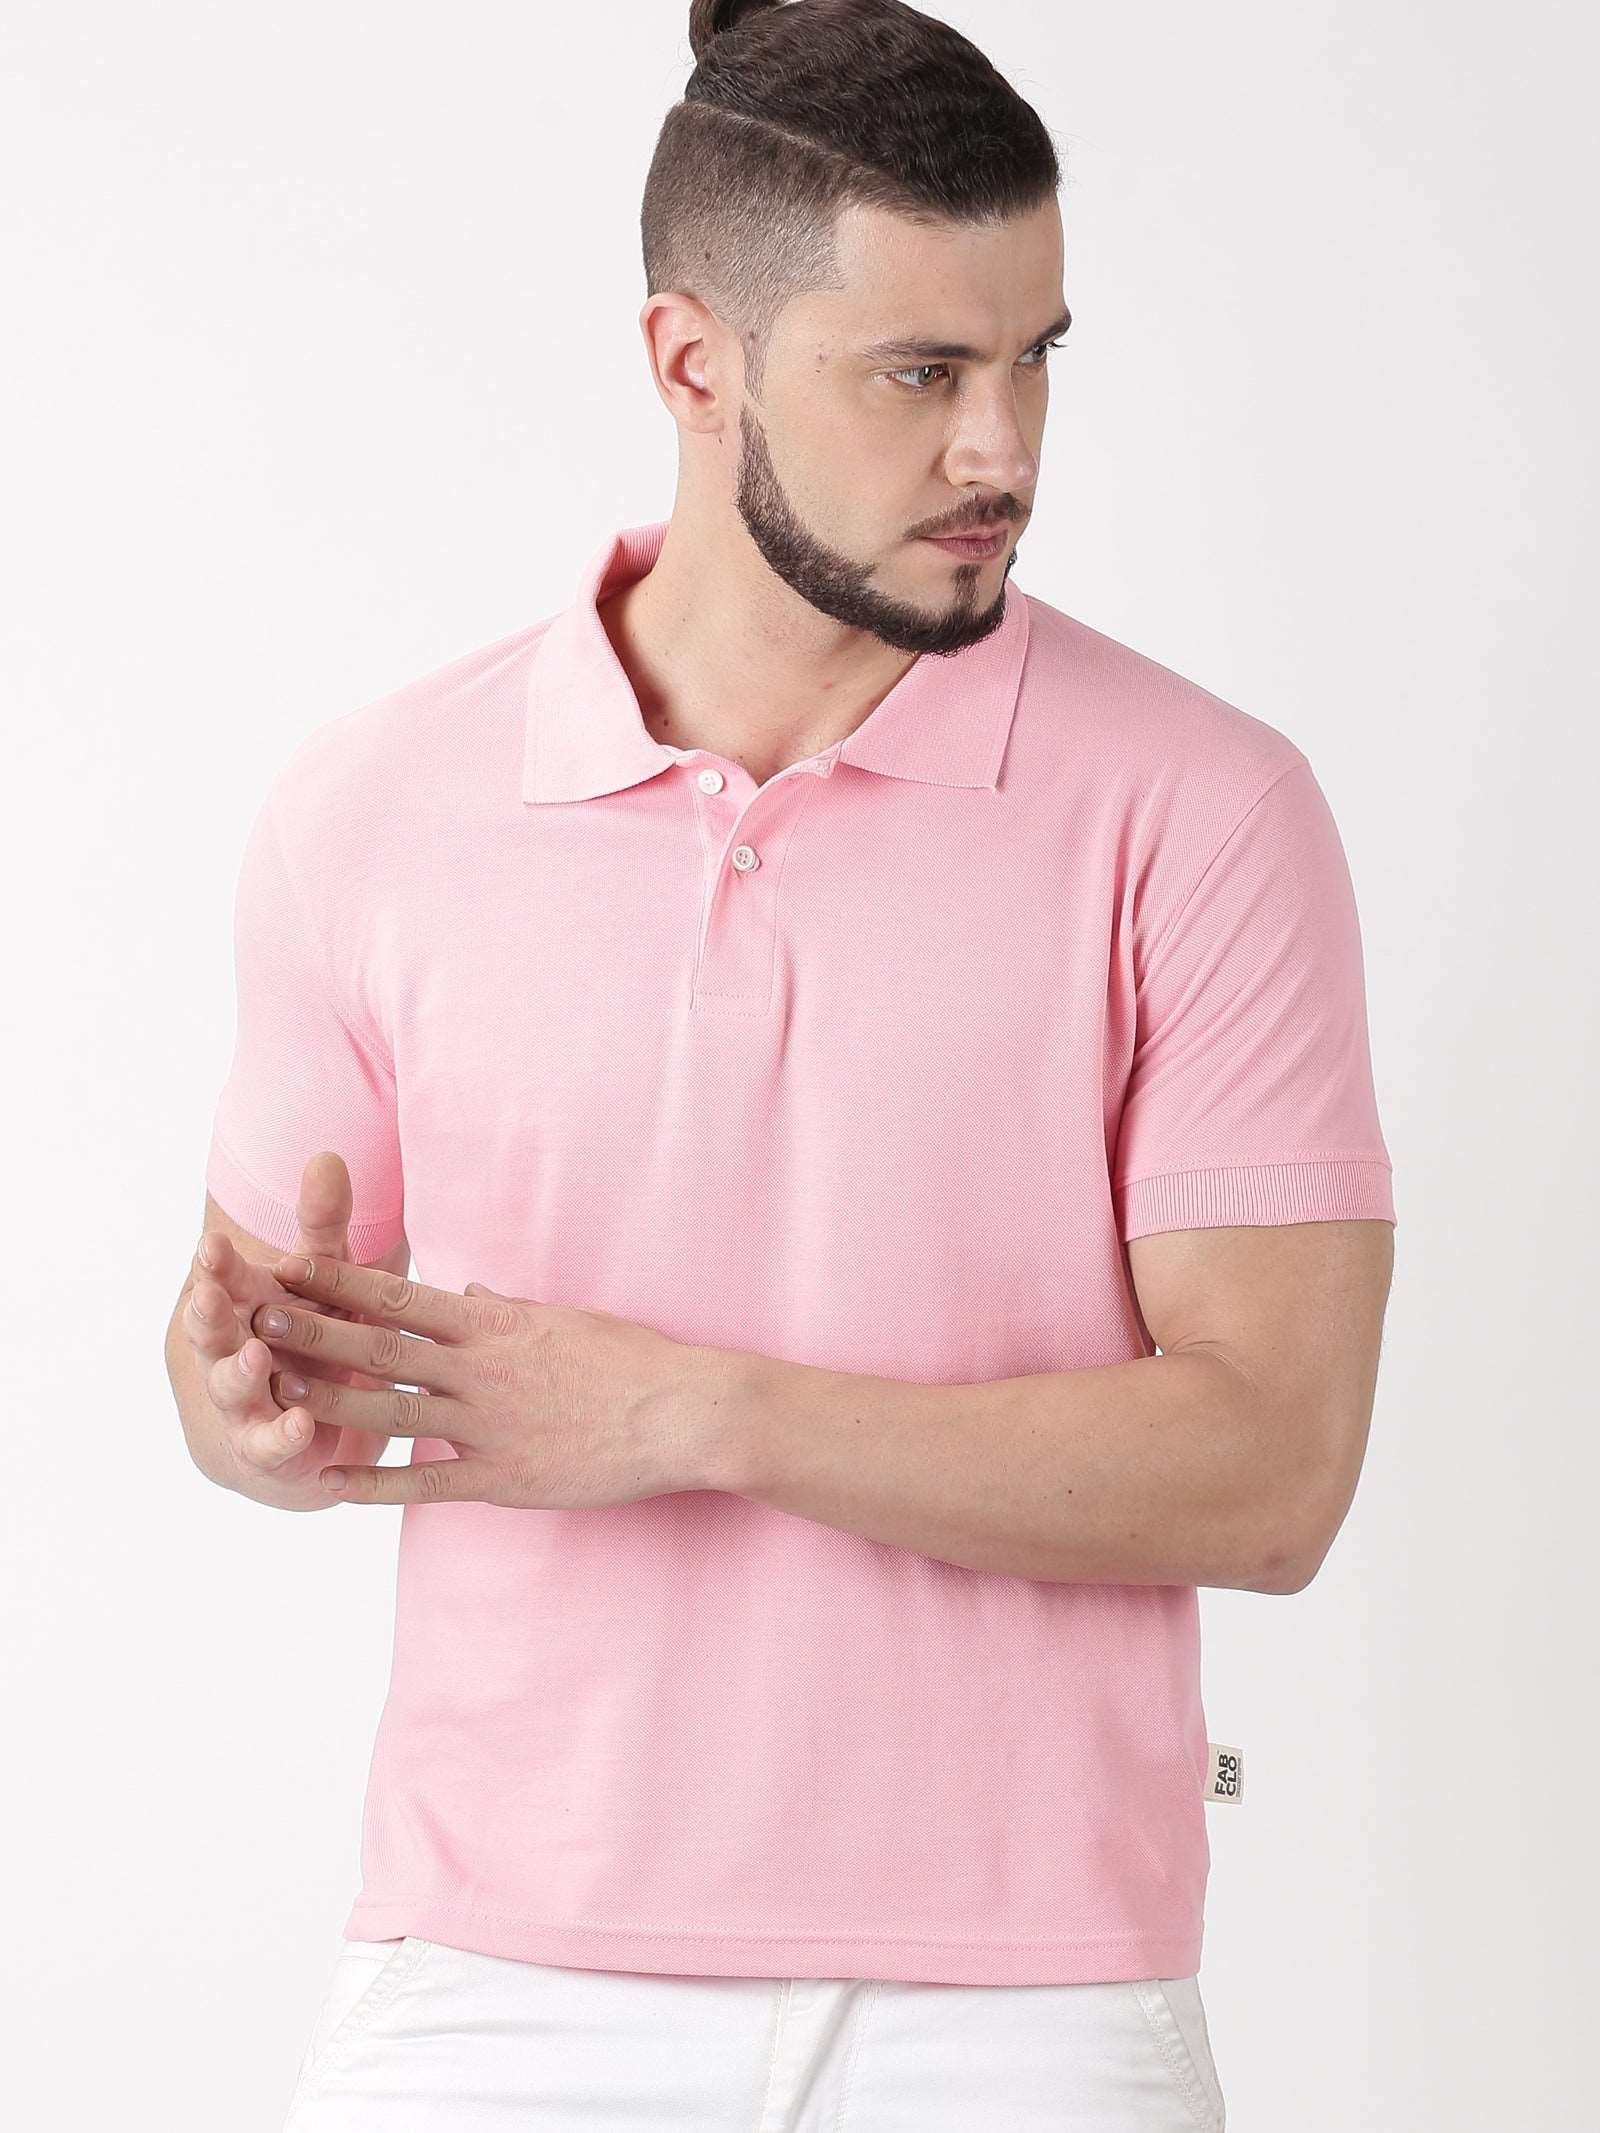 Organic Cotton Polo, Natural Fabric, No Synthetic Dyes.